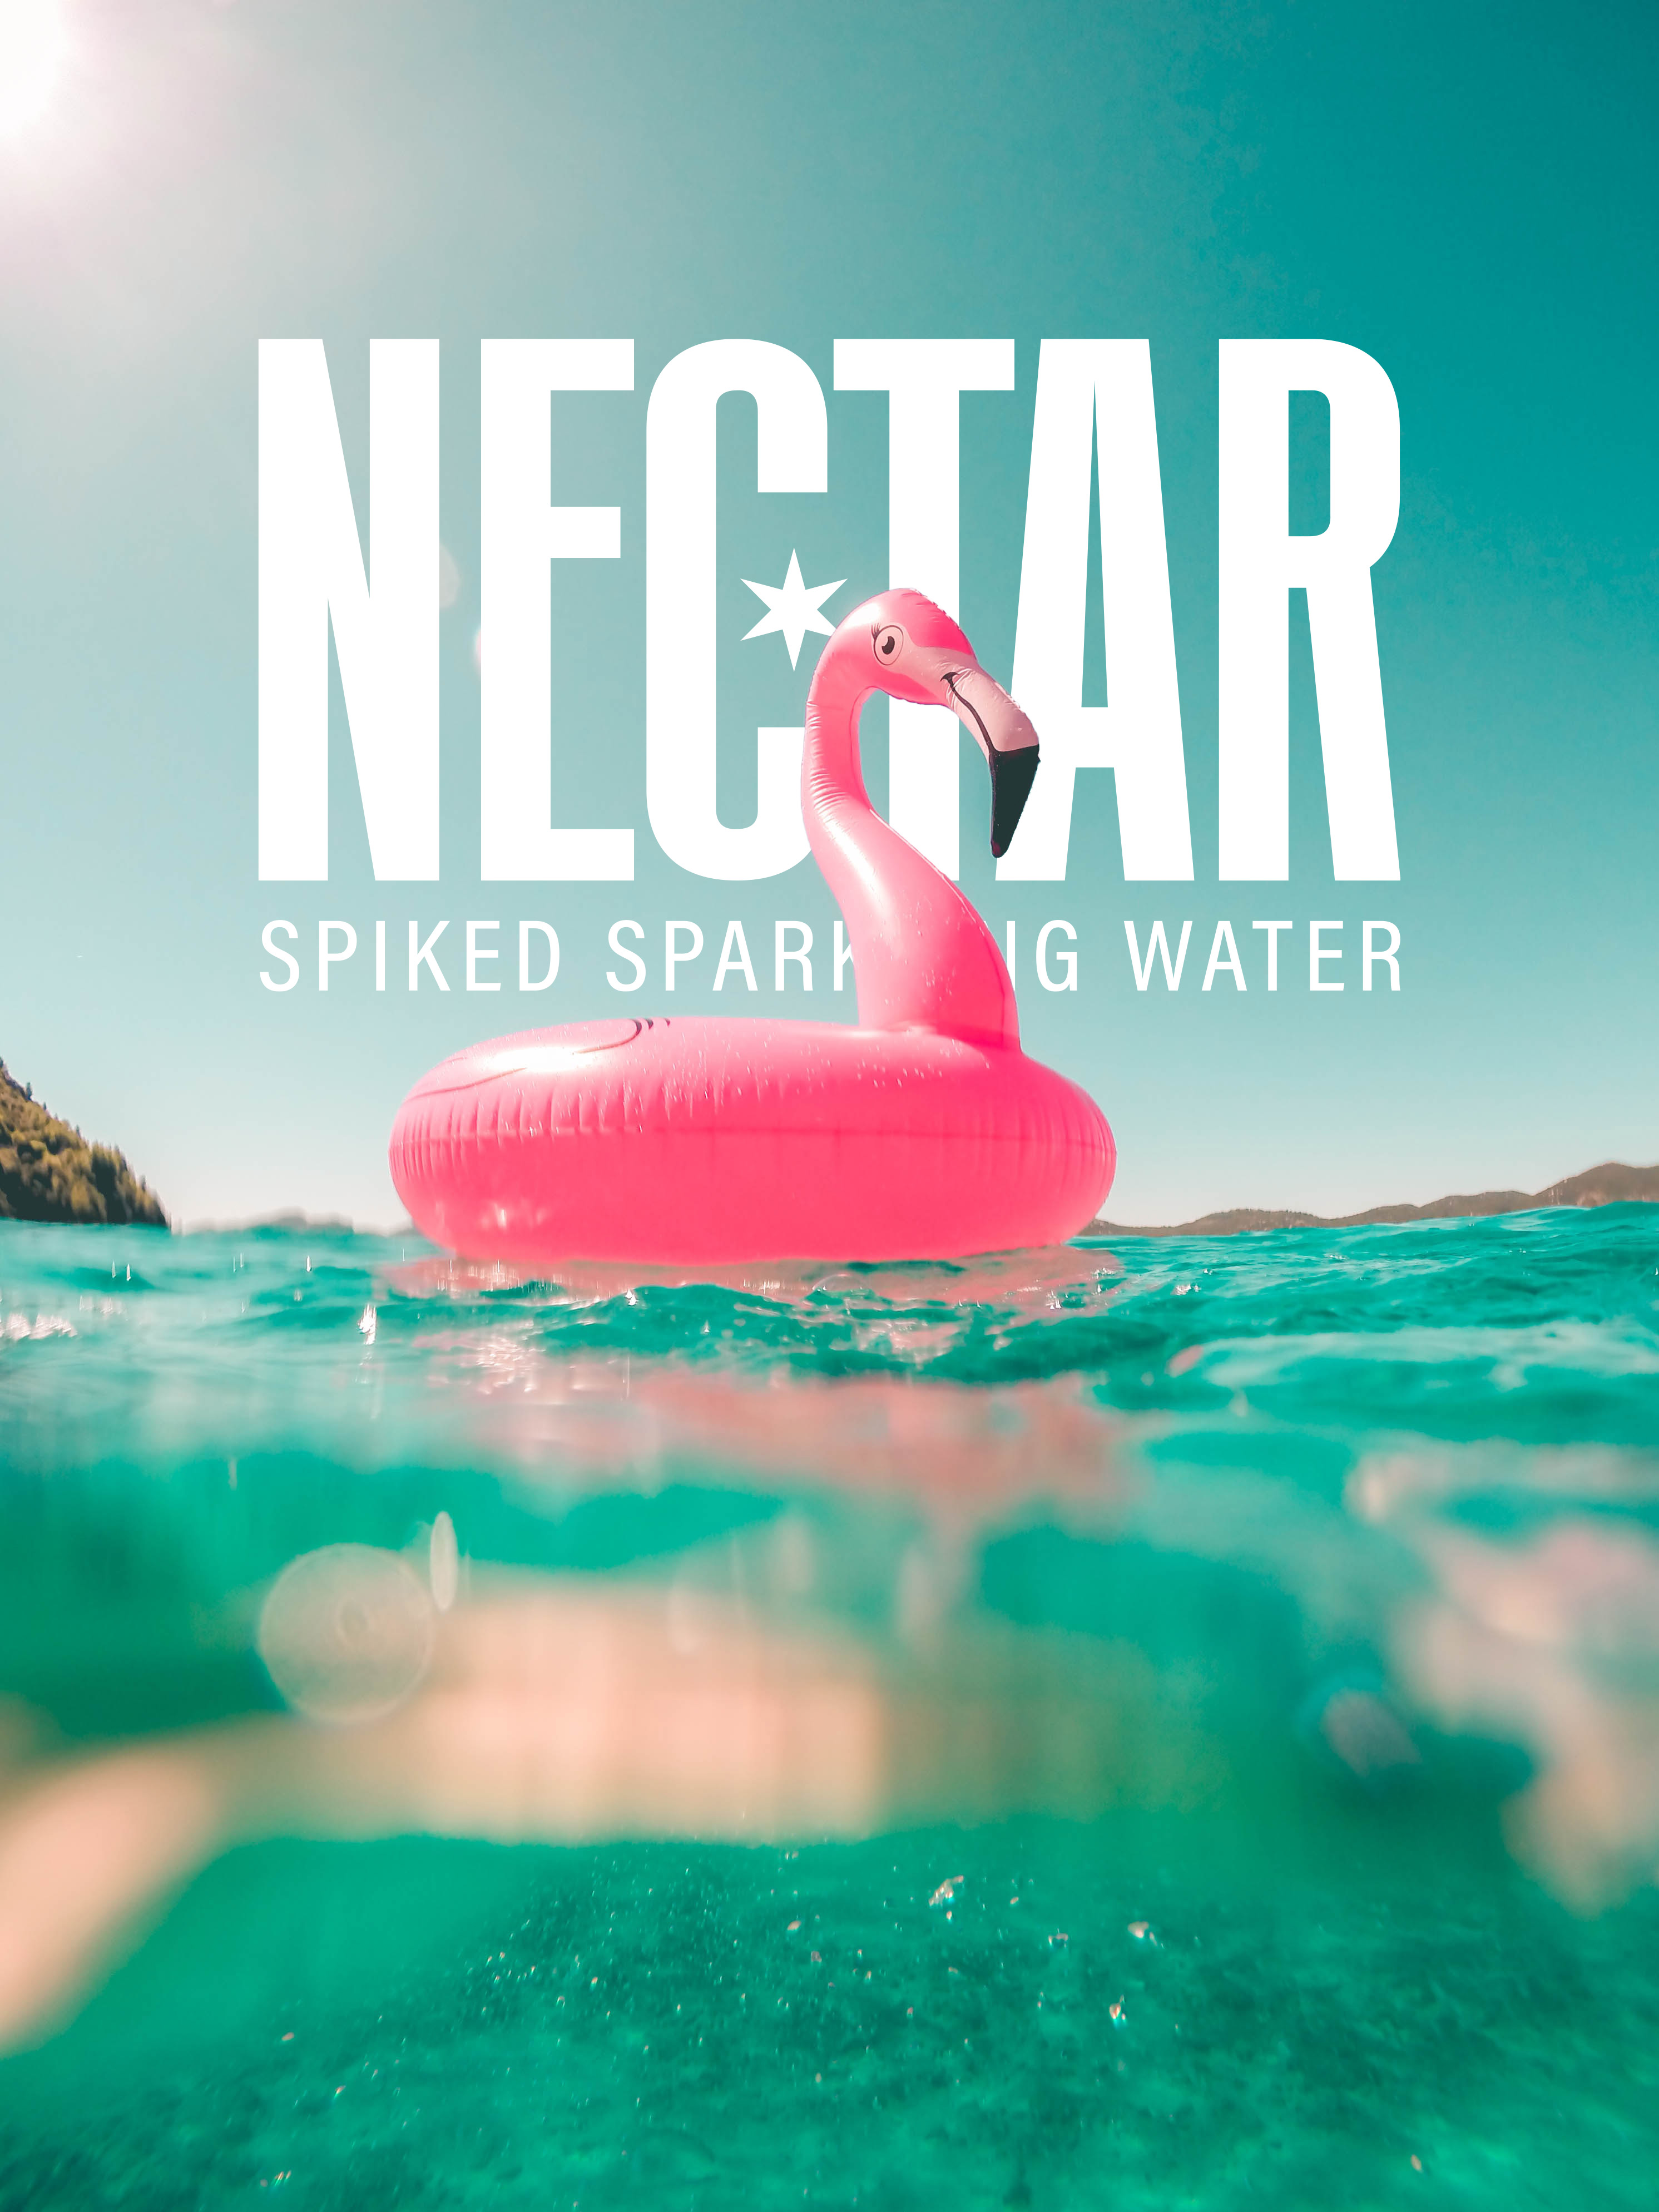 Nectar advertisment showing nectar logo above floating flamingo pool floatie in water.